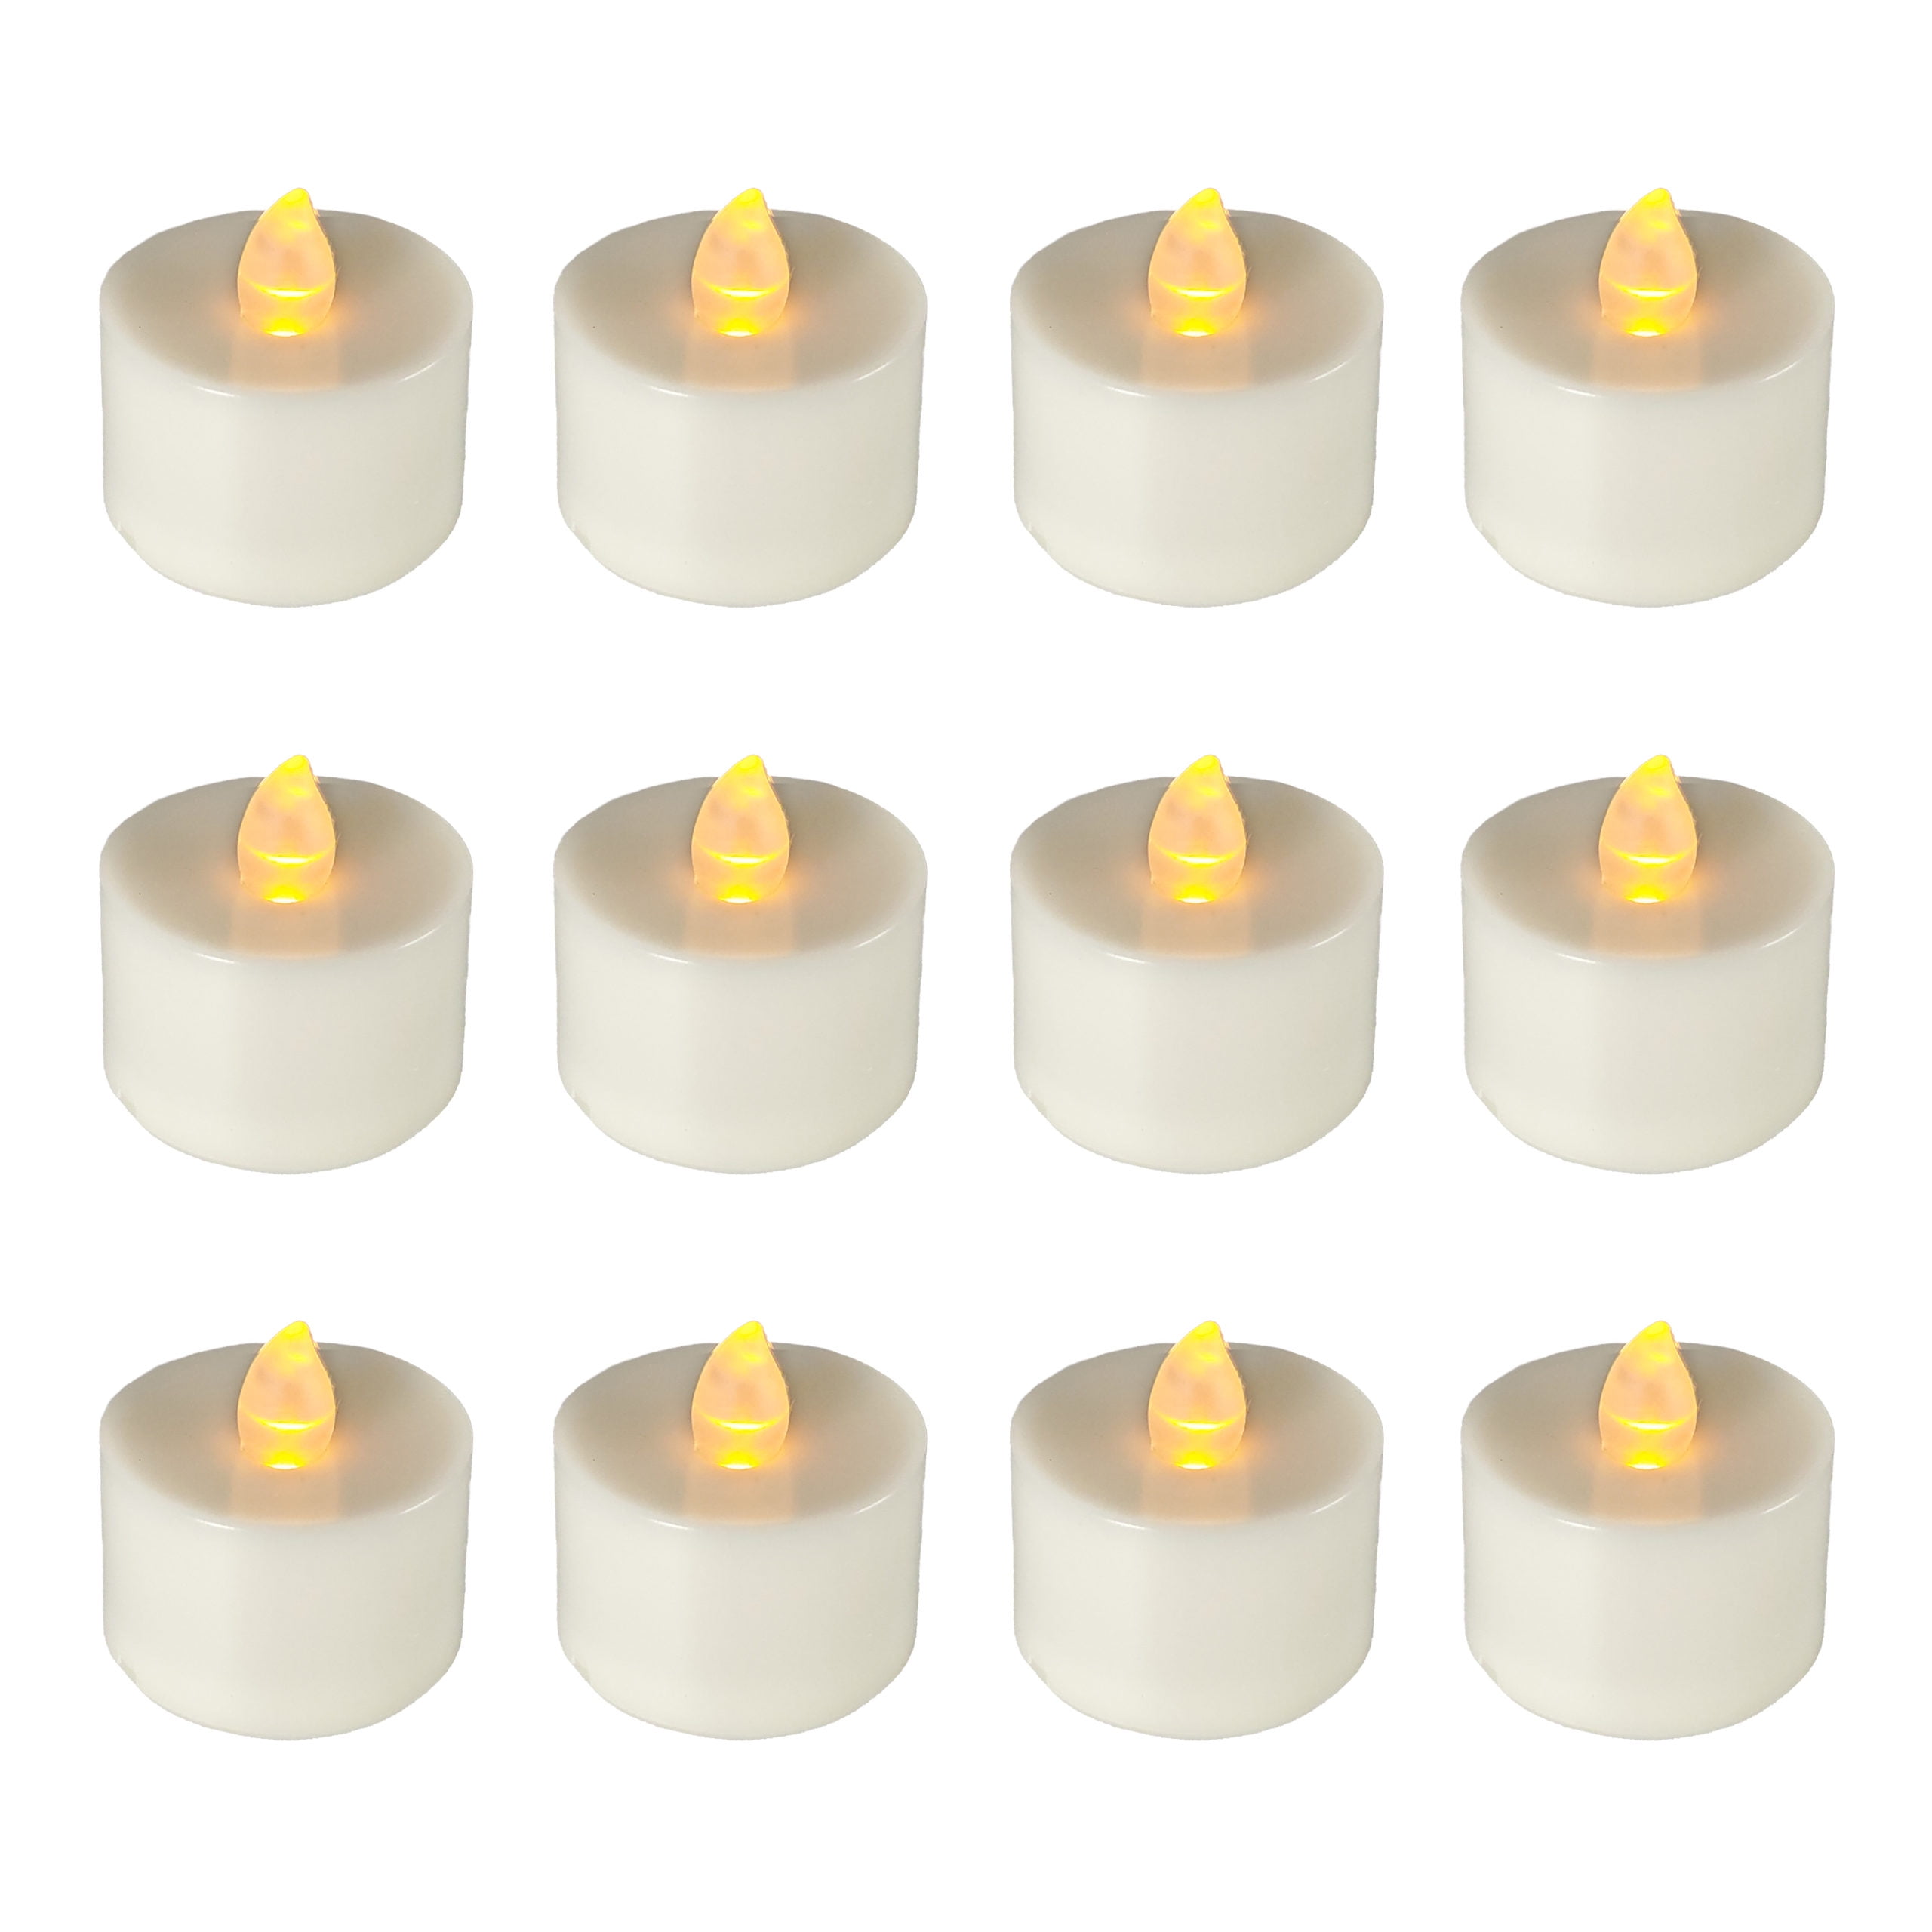 12 LED Votive Candle White Bath Living Dining Room Home Battery Operated US SELL 